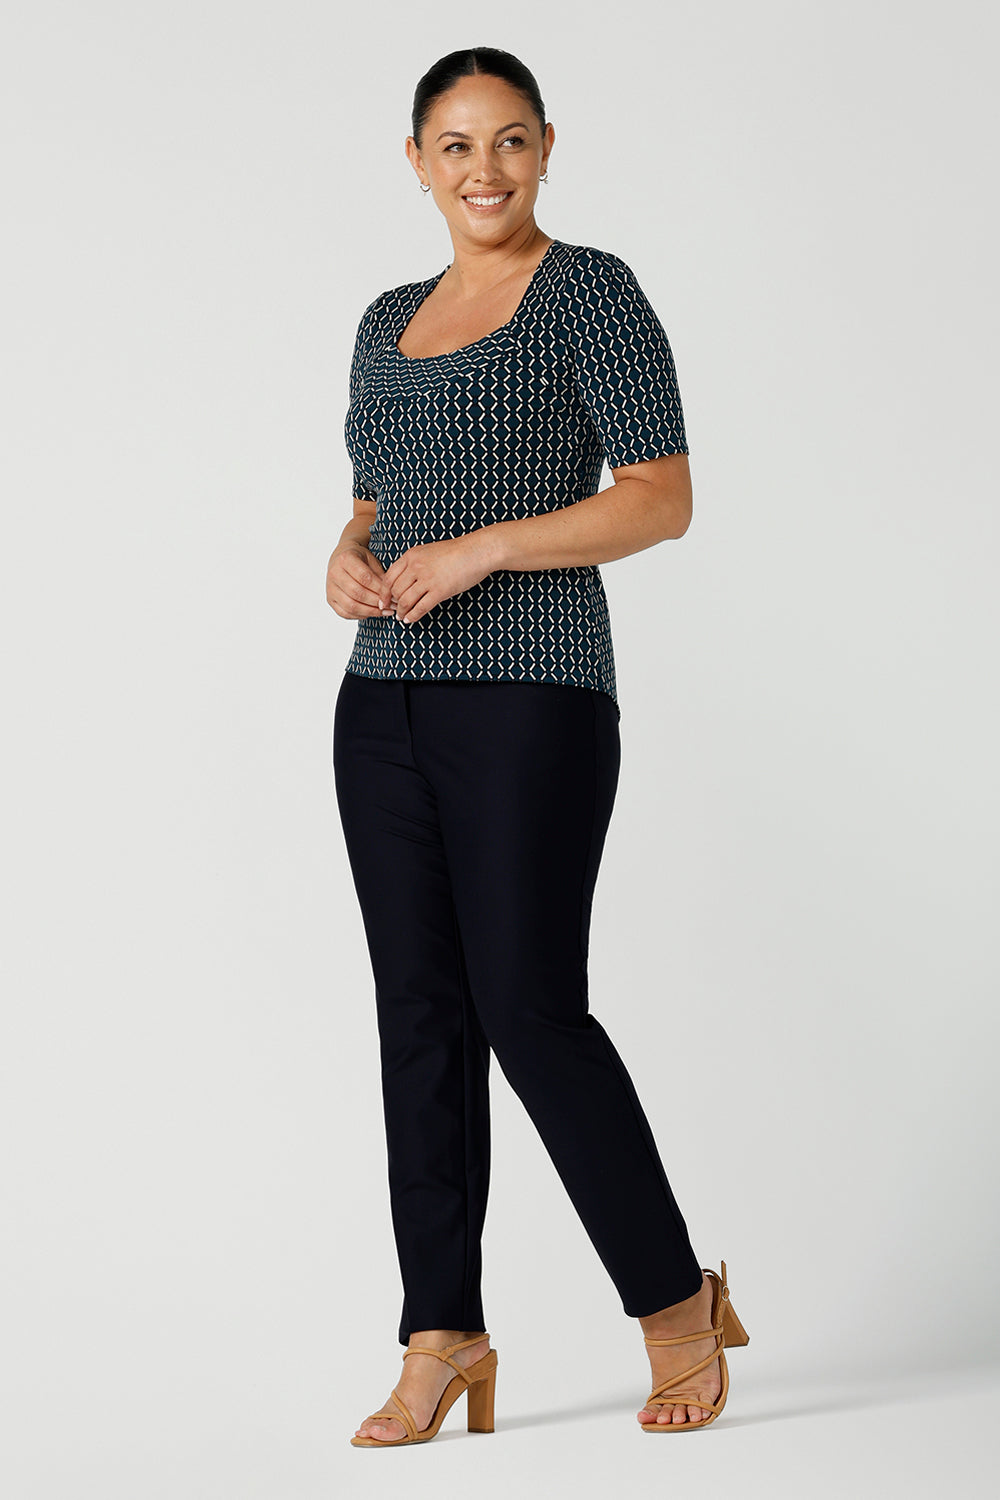 A size 12 woman wears the Berni Top in Infinity with a jade base colour and geometric pattern. A comfortable jersey work top style back with the Lulu pants in navy. Made in Australia for women size 8 - 24.